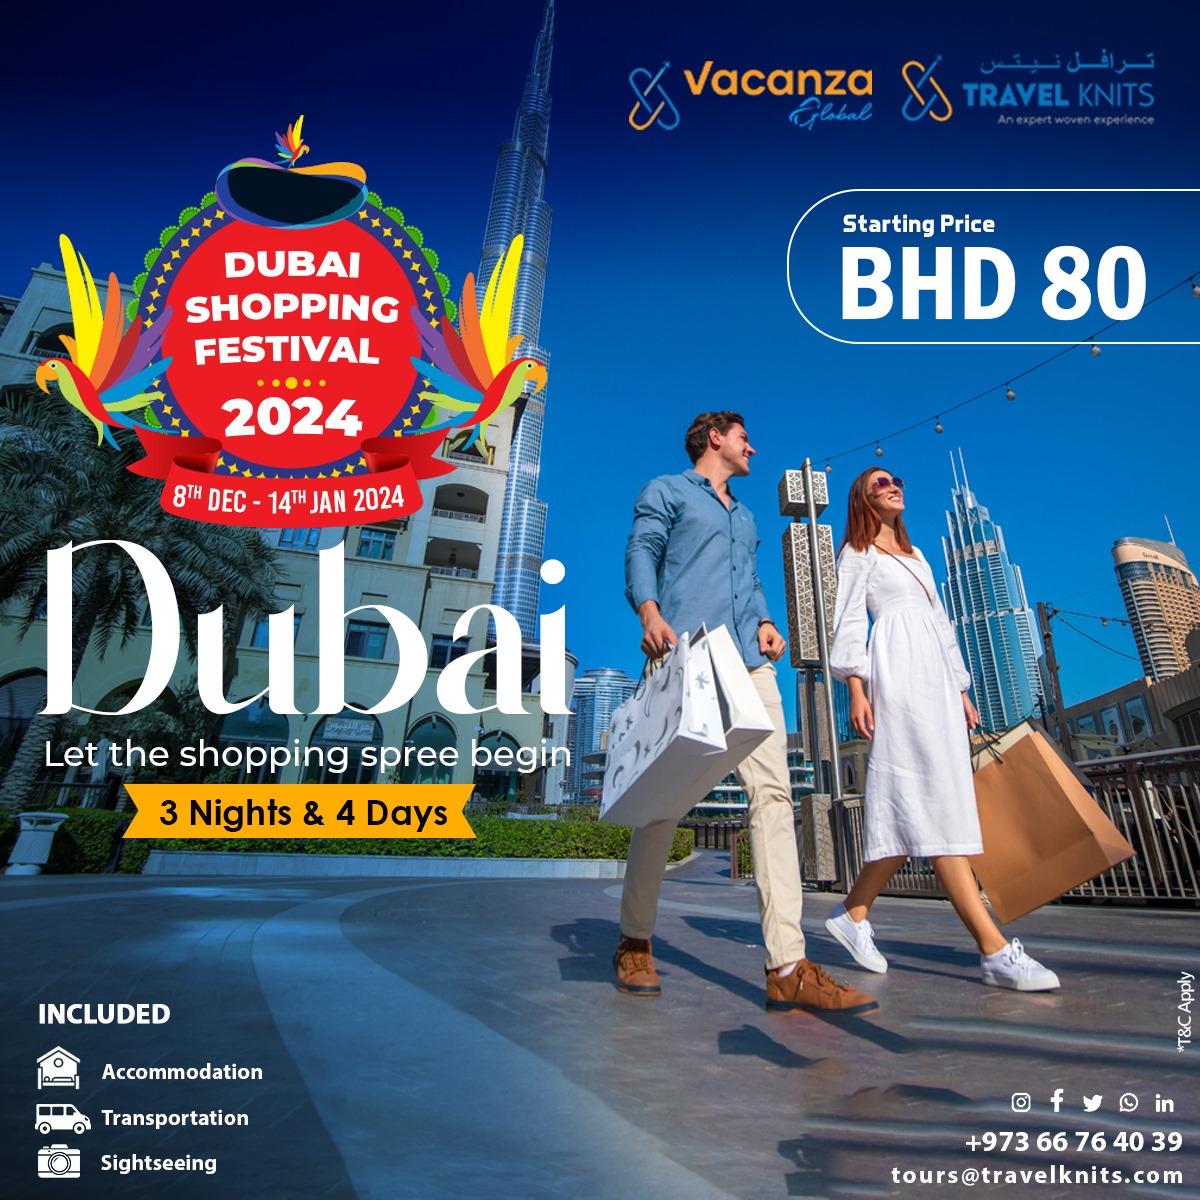 Dubai Shopping Festival|UaeTour Packages - Book honeymoon ,family,adventure tour packages to Uae|Travel Knits												